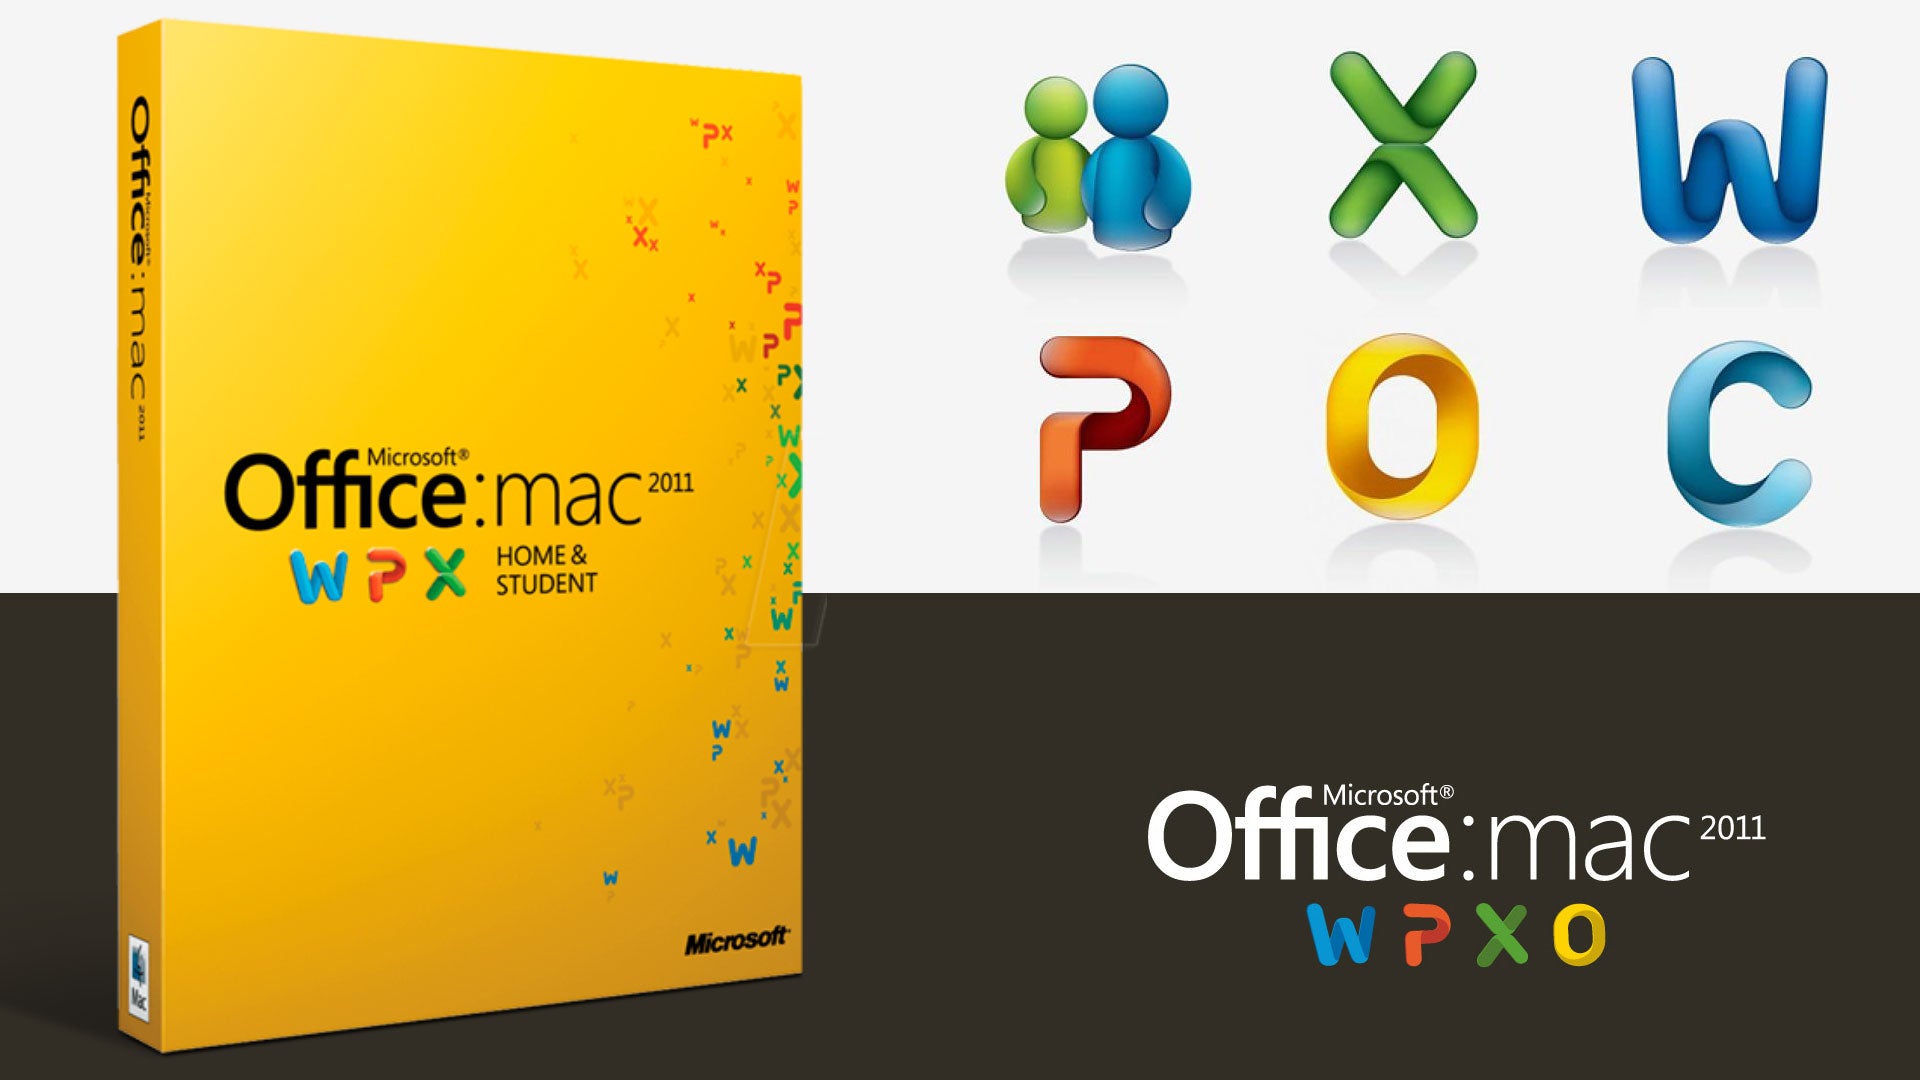 Microsoft Office 2011 for Mac (End of Mainstream Support)